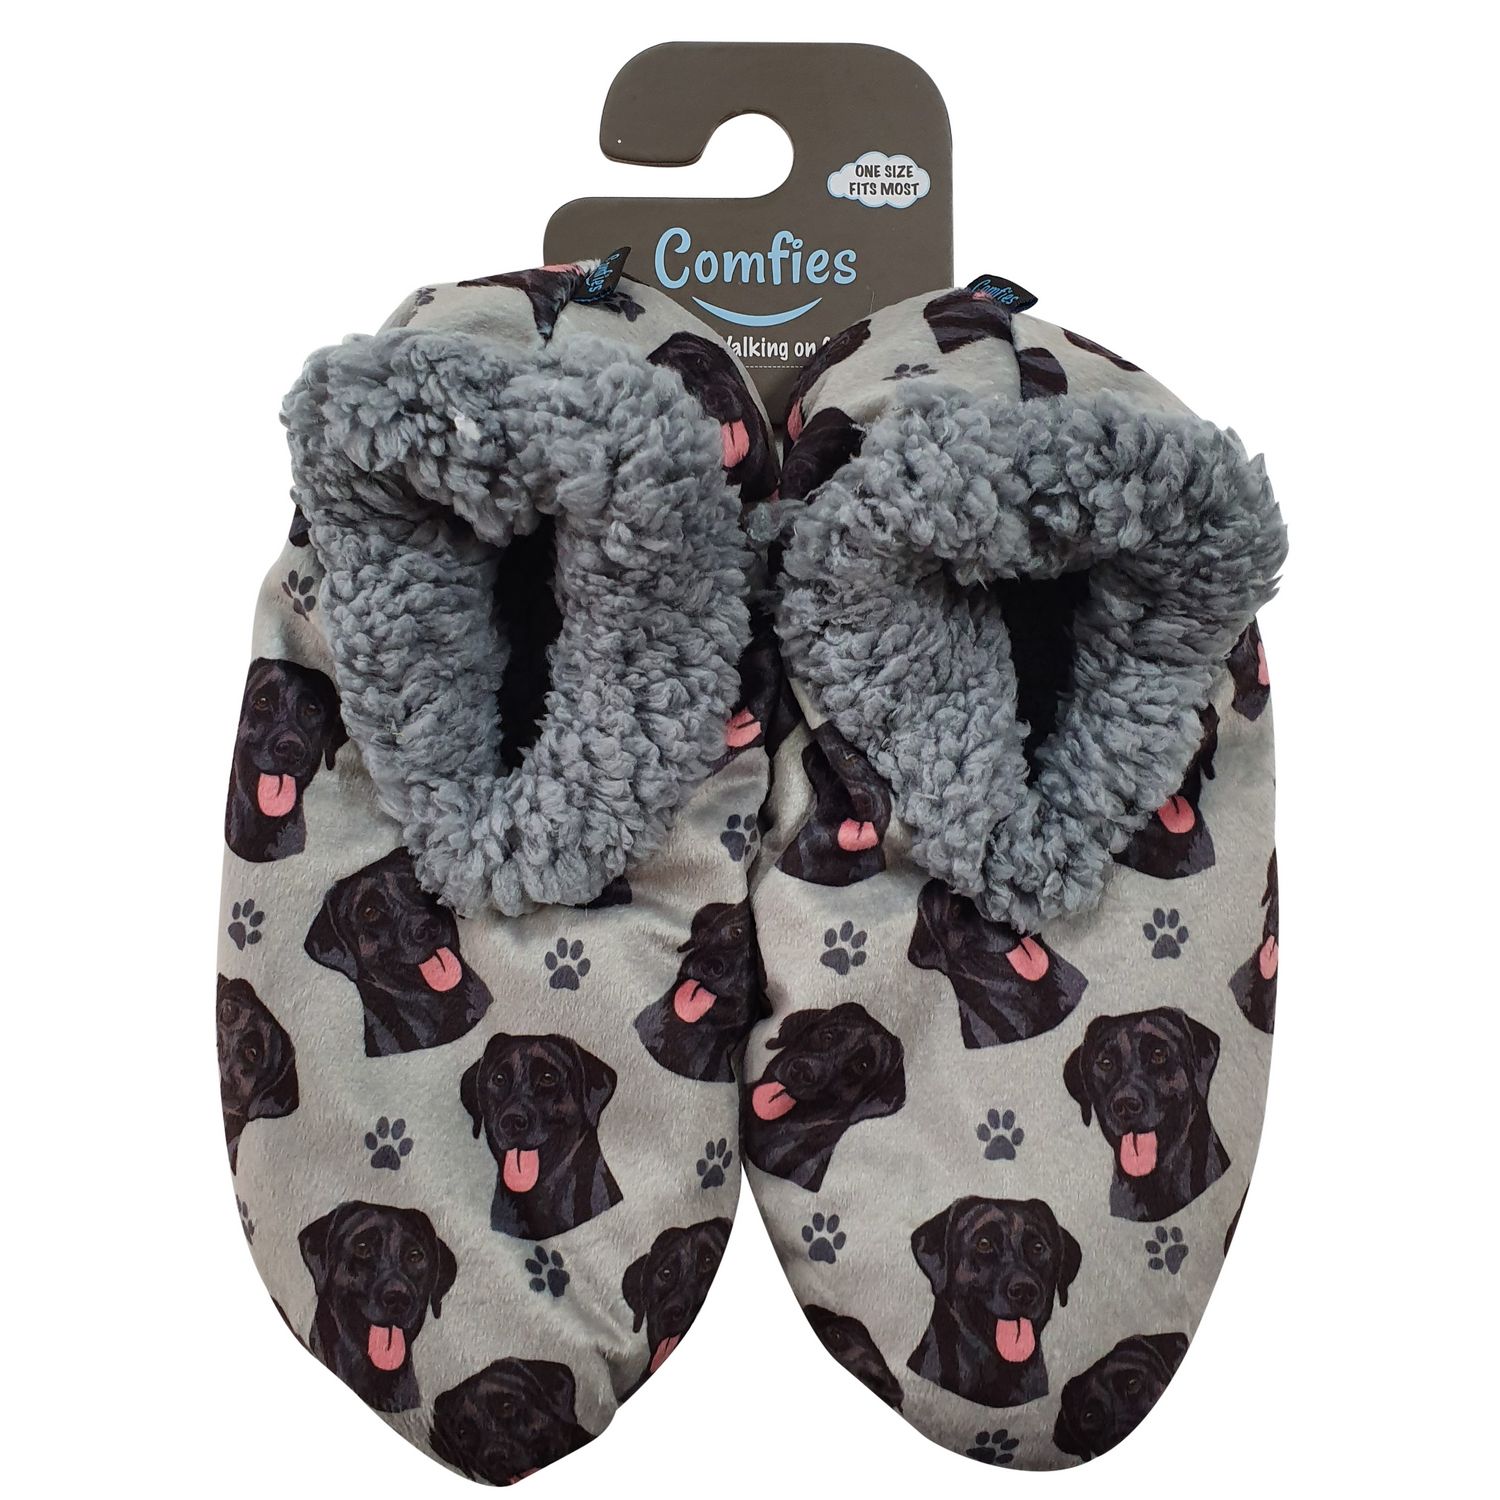 Labrador (Black) Slippers - Comfies  (Fabric Colors Vary)